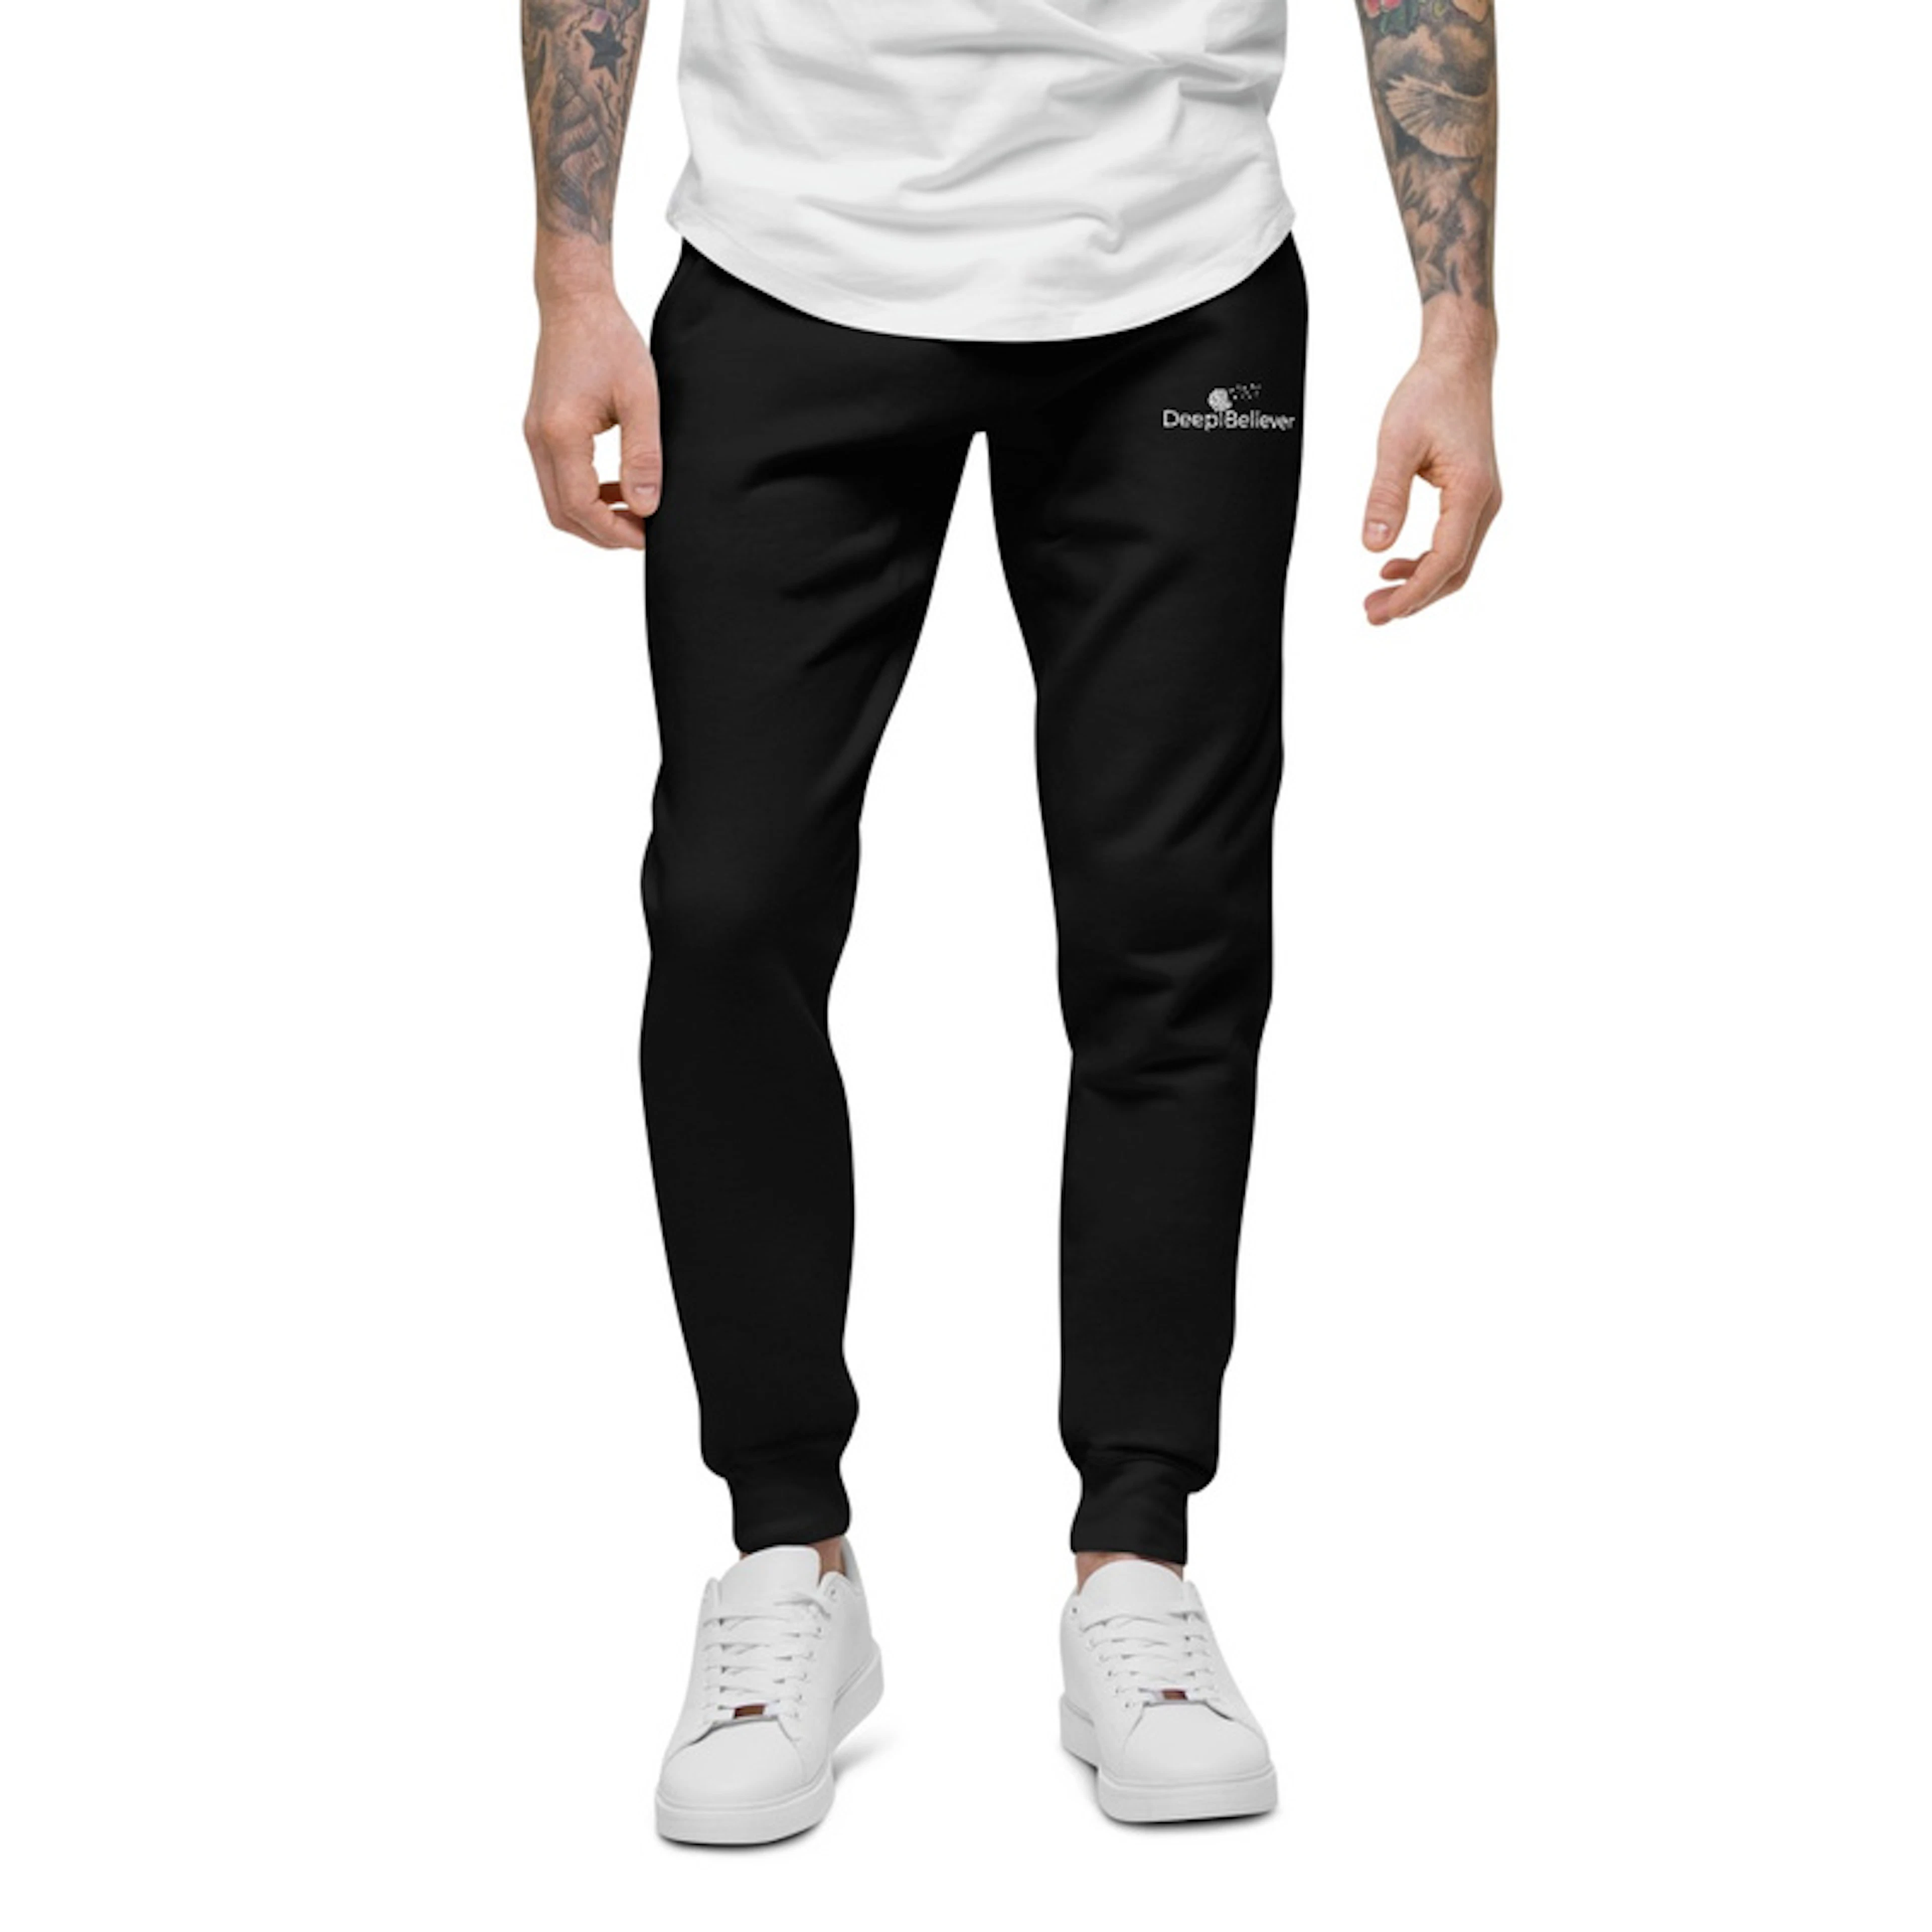 Deep Believer Embroidered Sweatpants